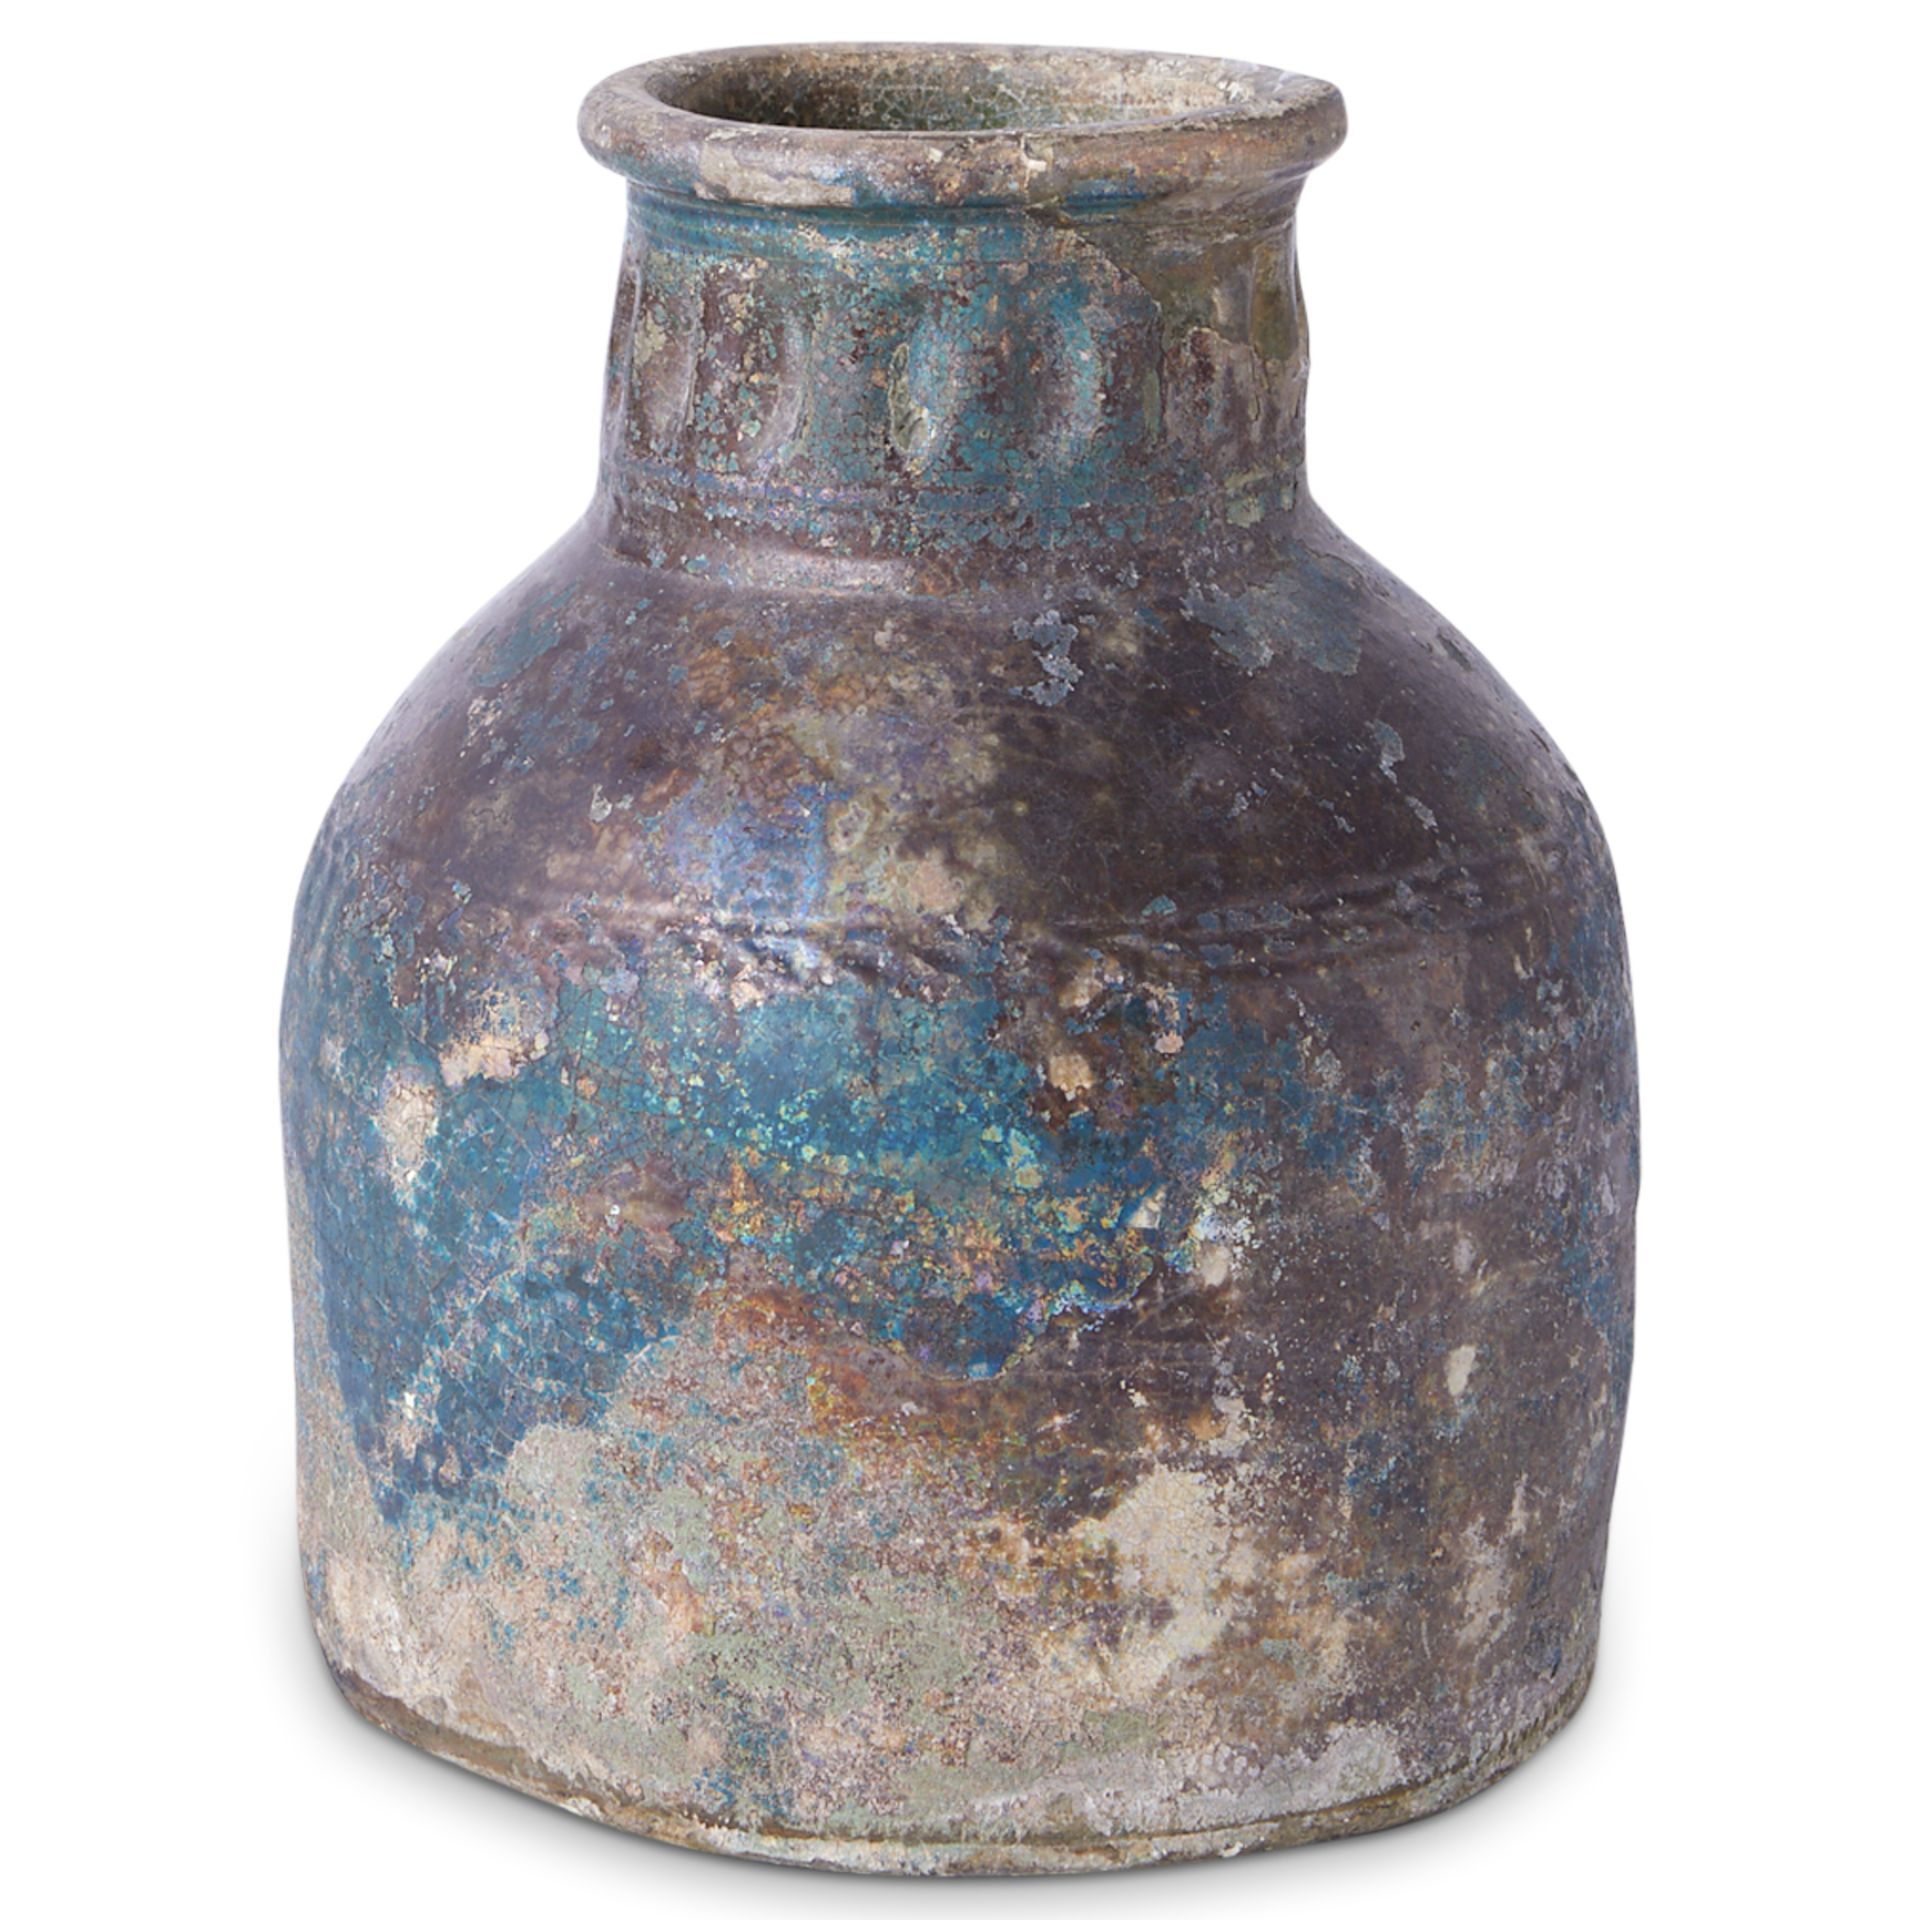 Large Early Persian Ceramic Vessel - Image 5 of 12